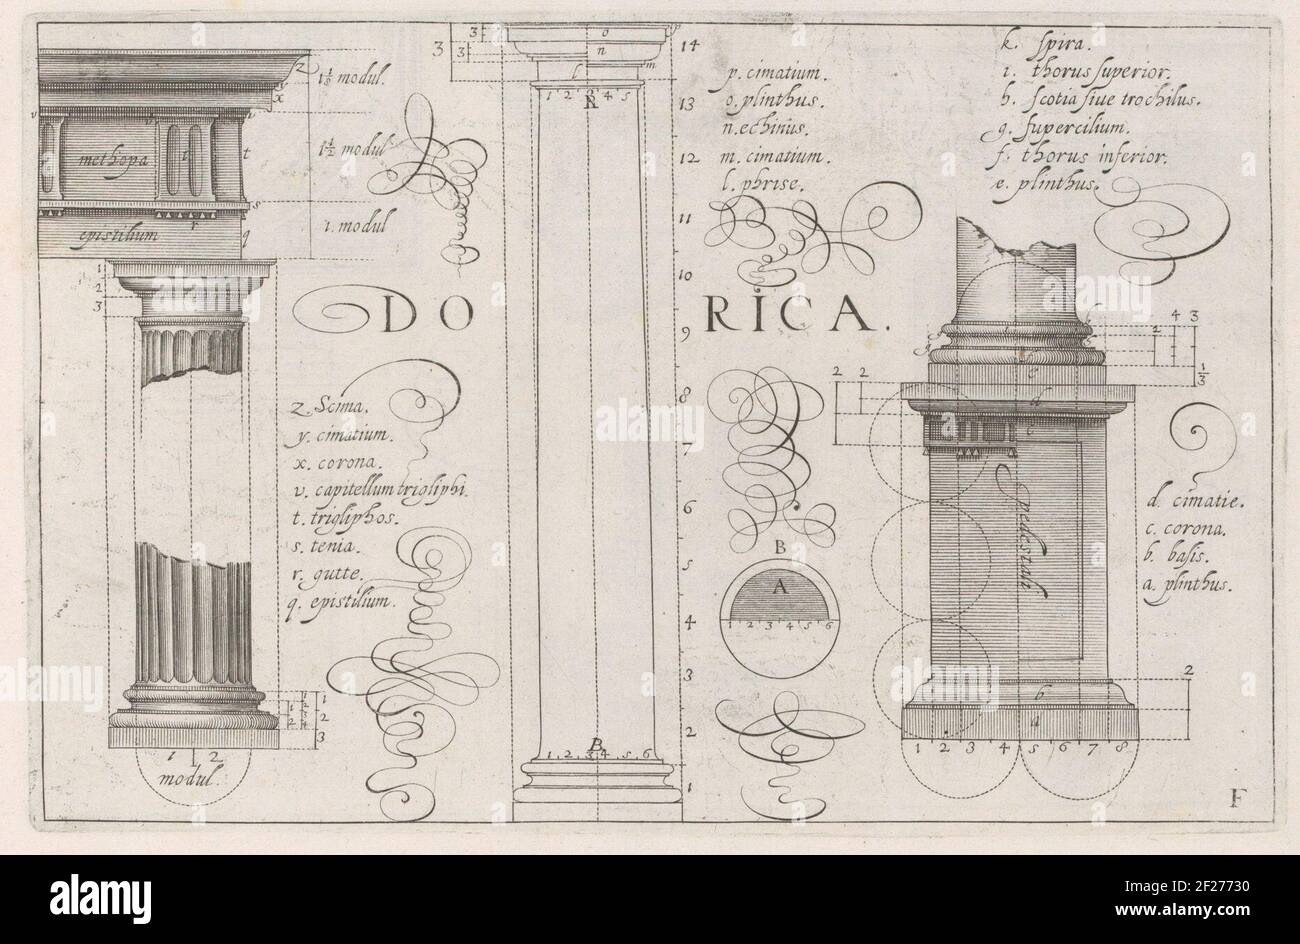 Dorische zuil; Dorica; Architectura.Construction and details of the Doric column. At the bottom right: F. Prent is part of an album. Stock Photo